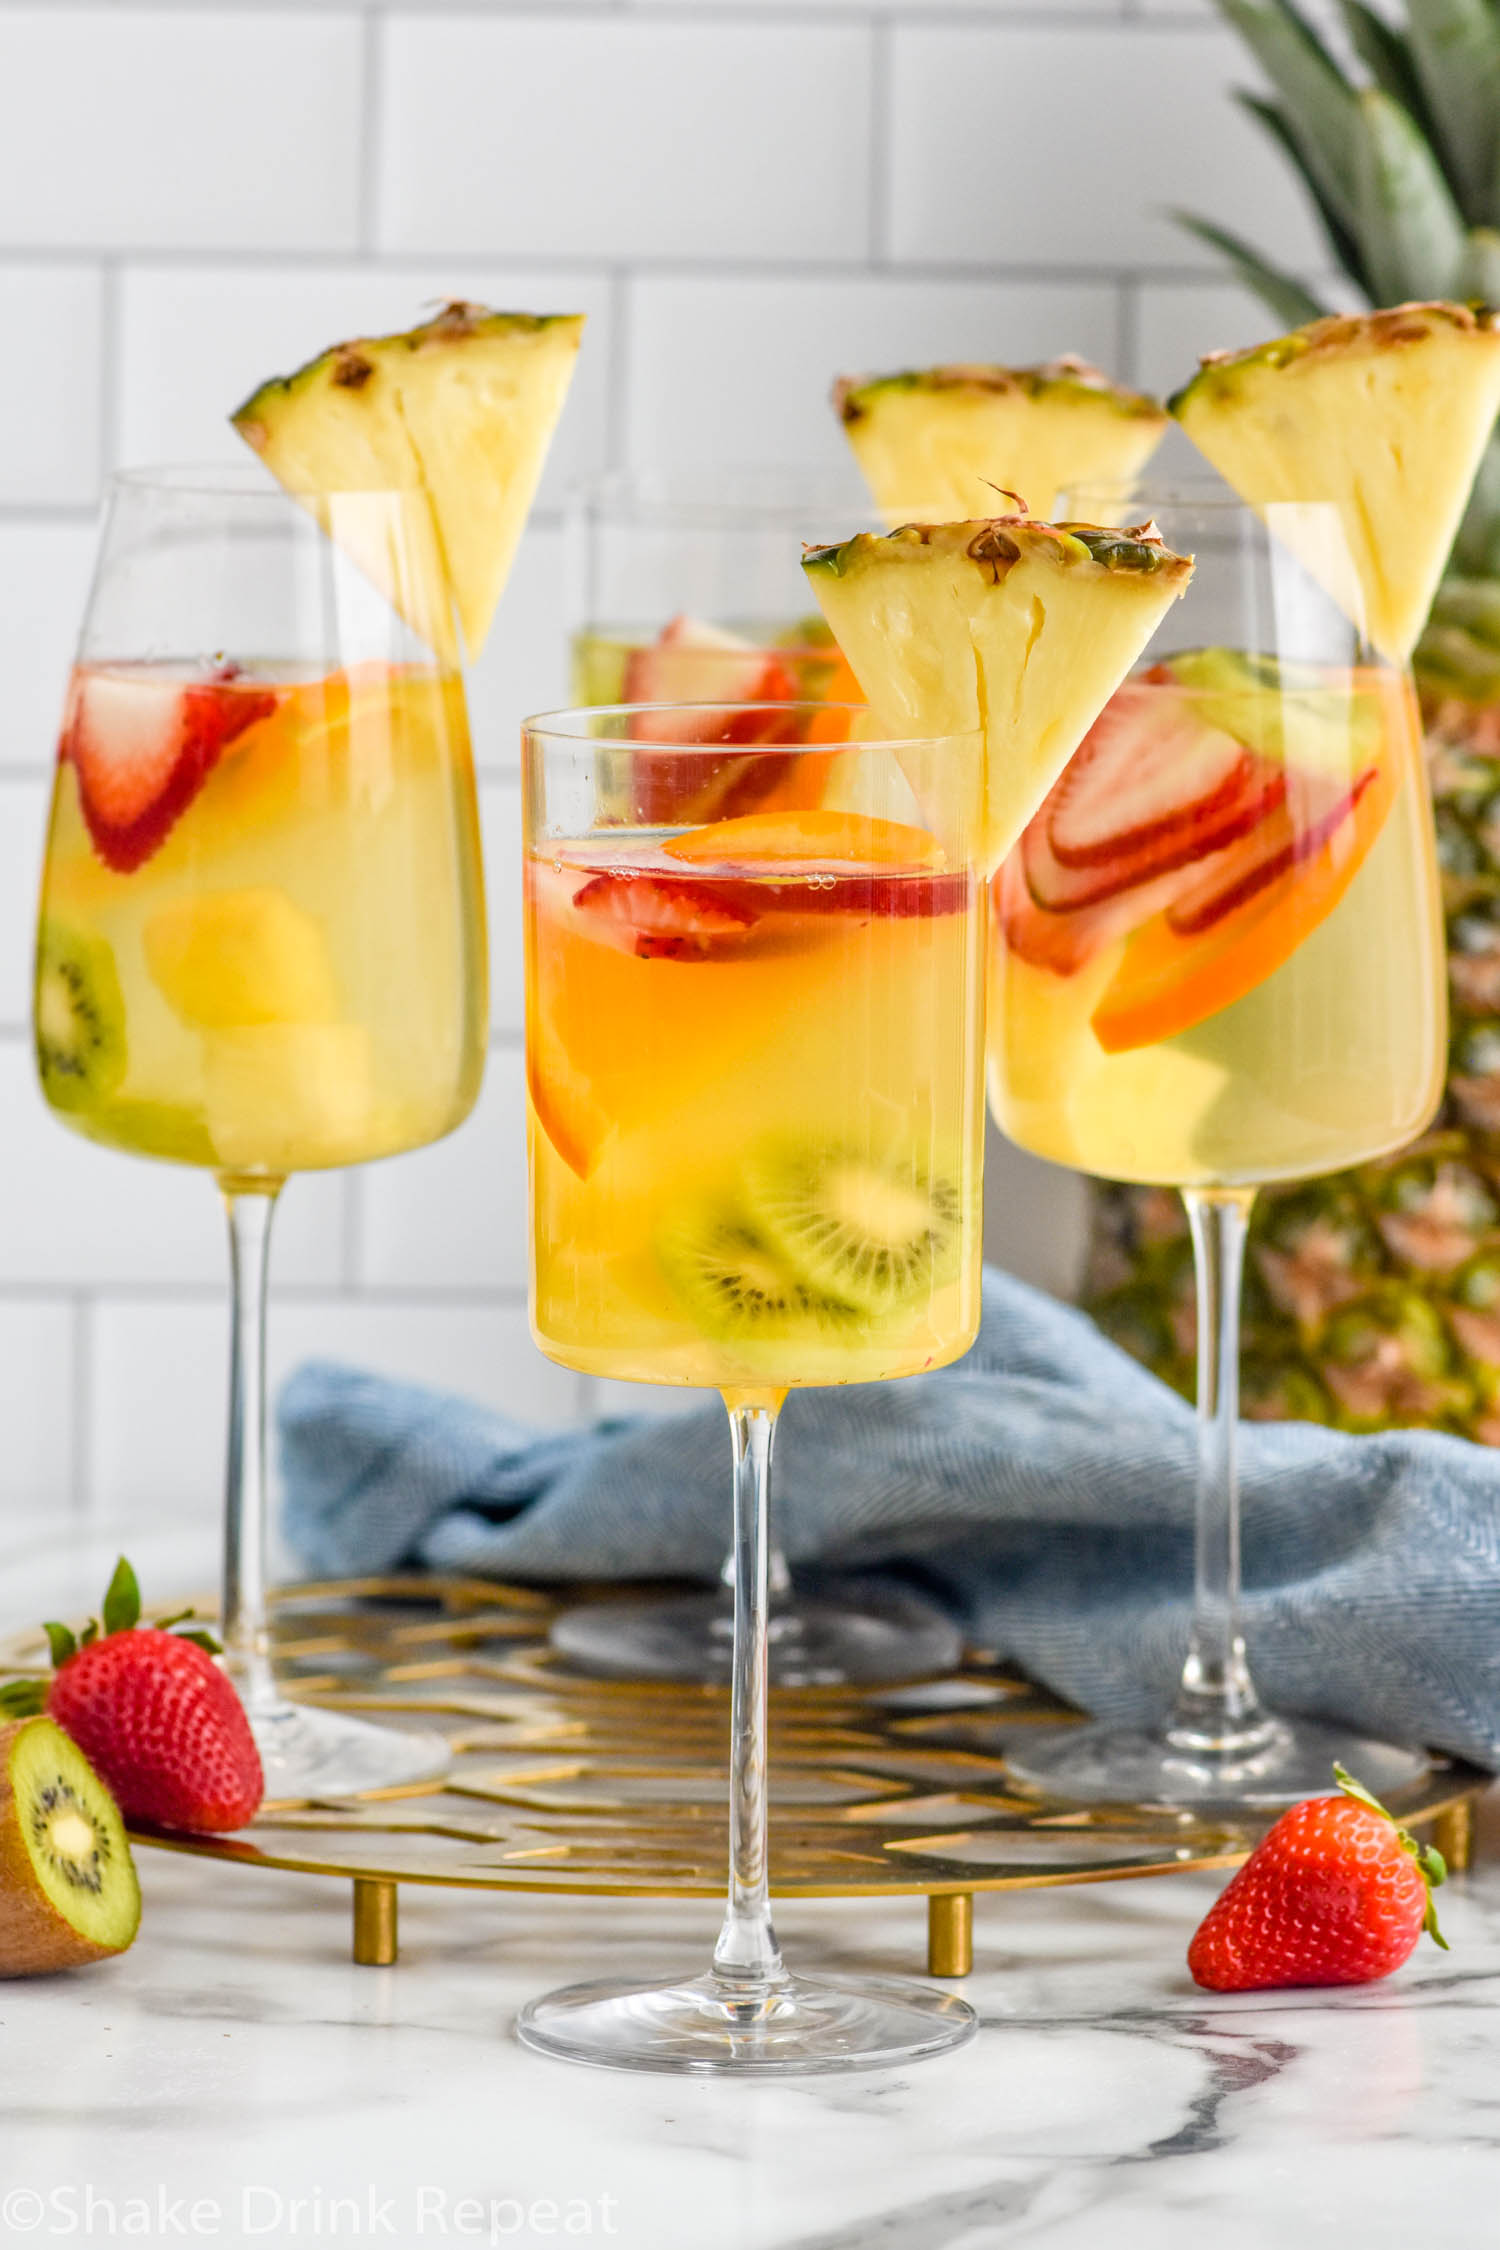 Four wine glasses of Tropical Margarita Sangria garnished with a slice of pineapple. Fresh strawberries and kiwi sitting beside.